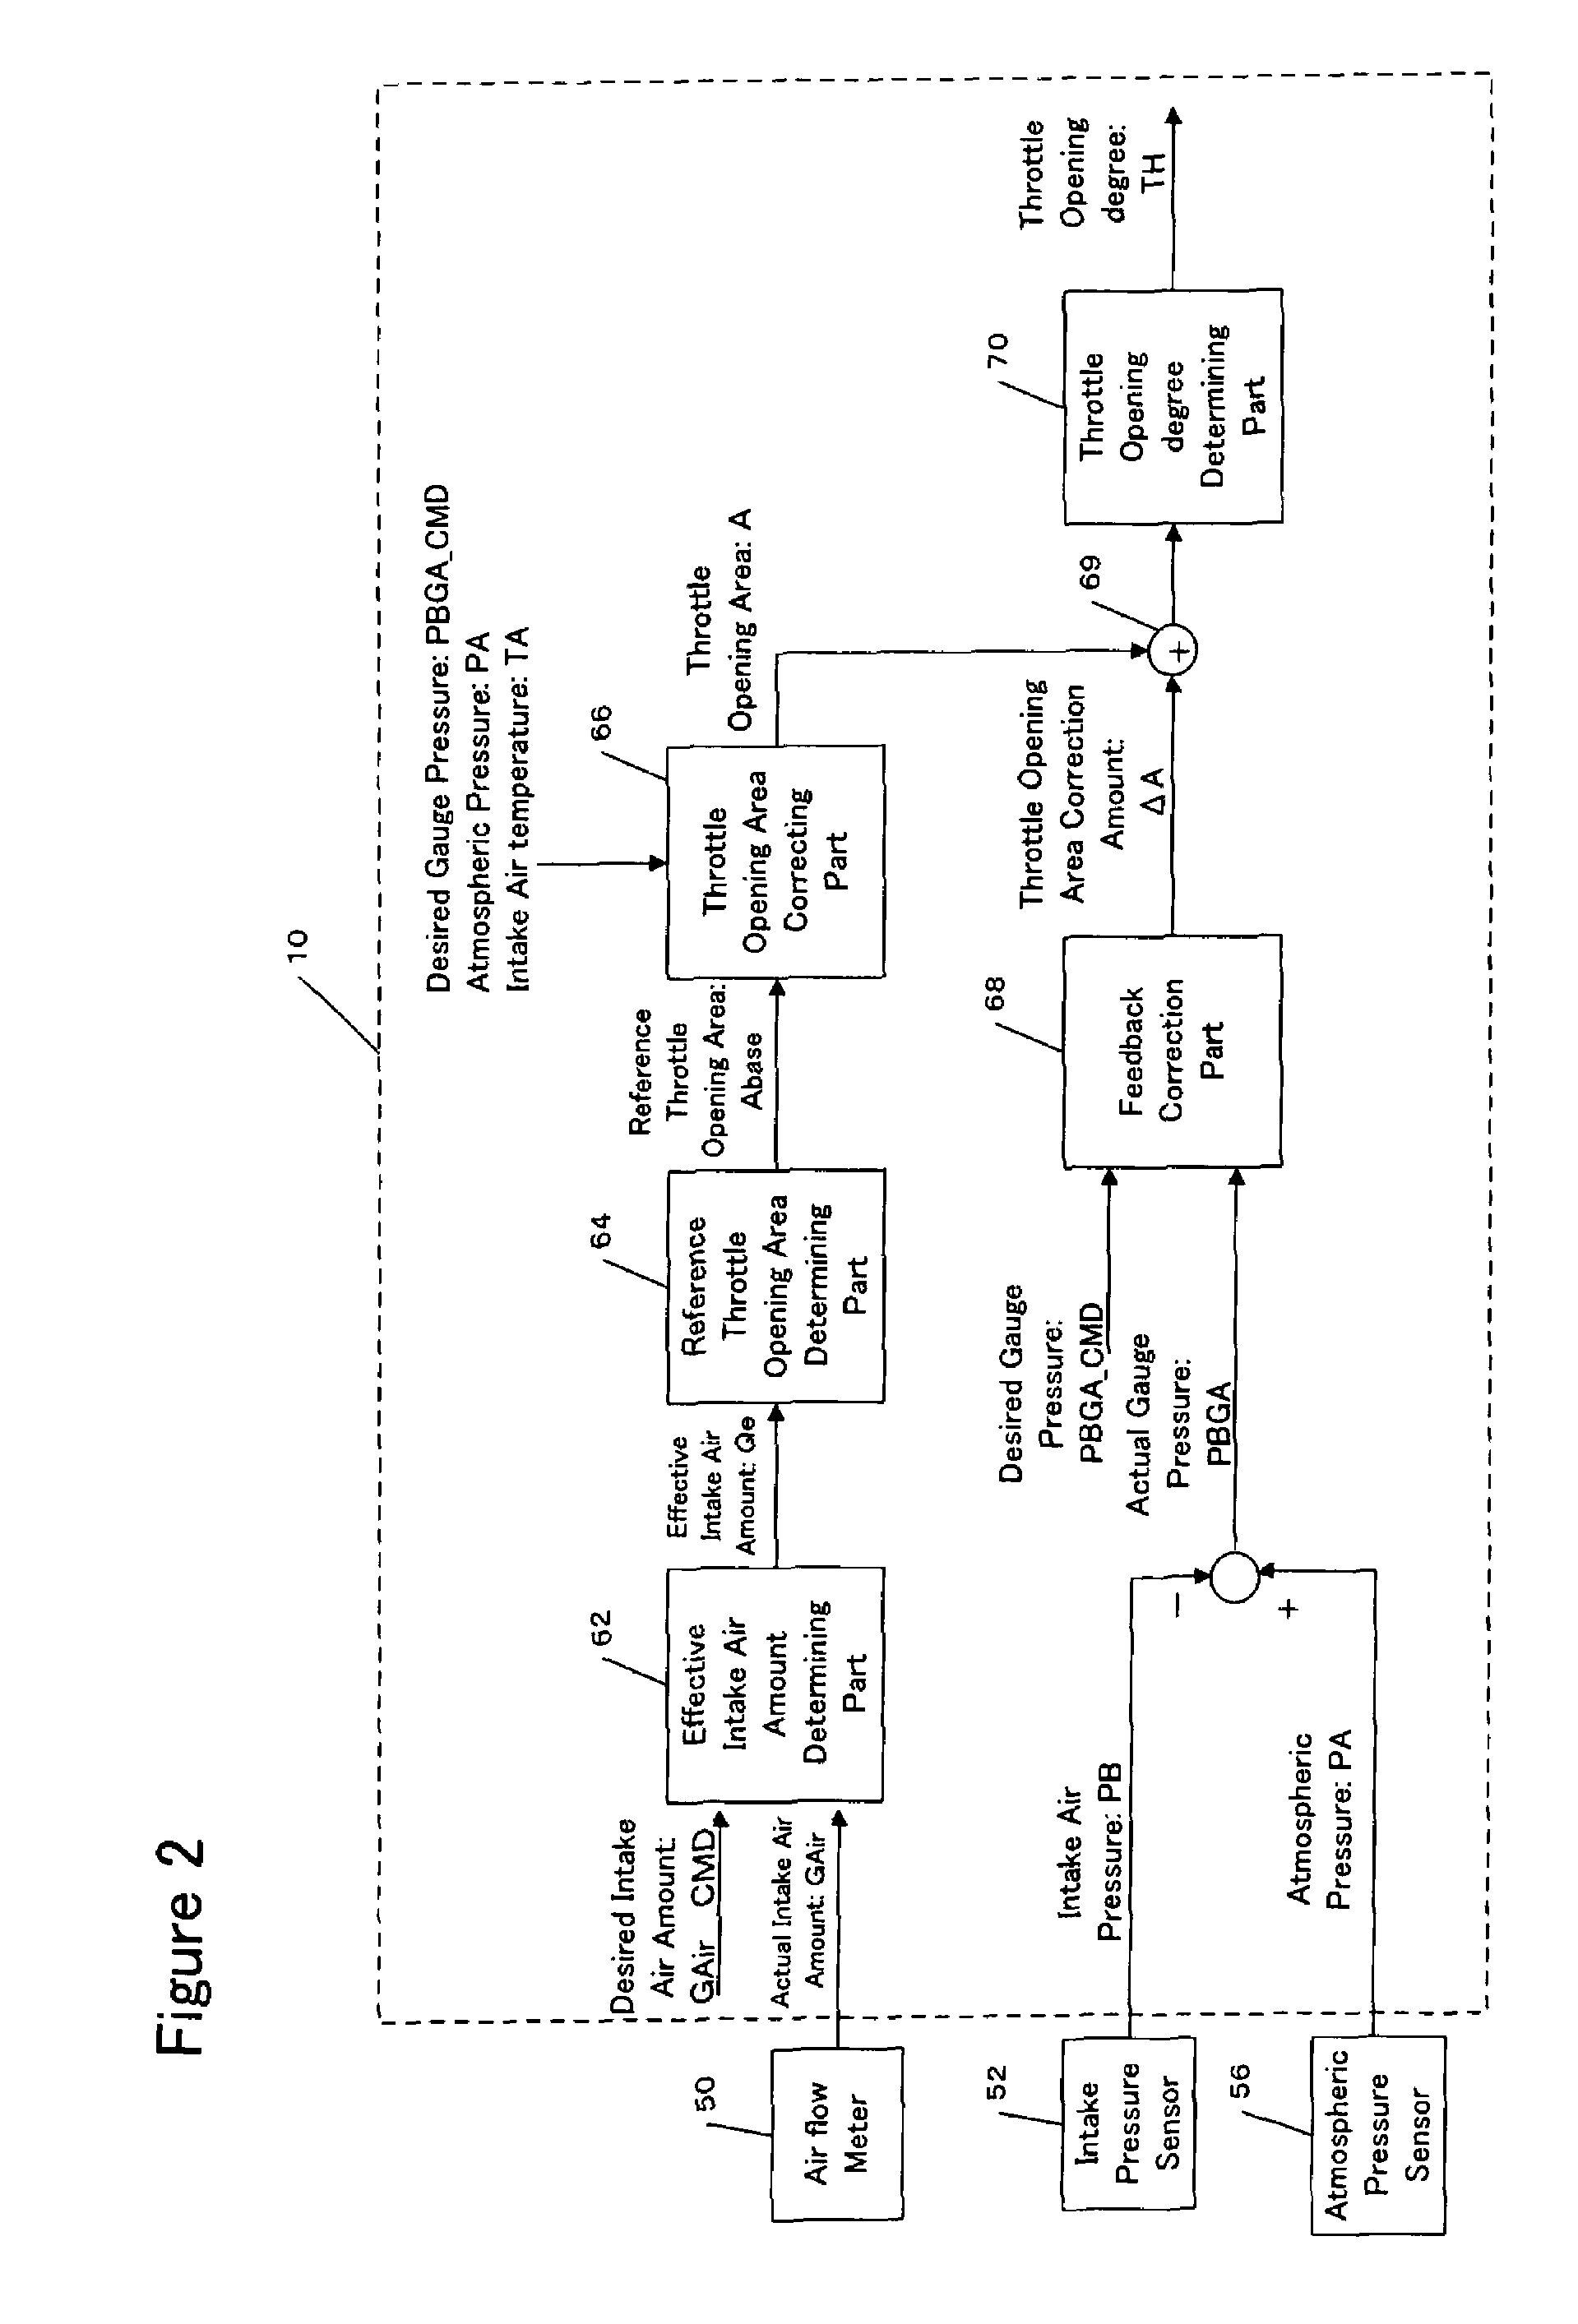 Intake air control of an internal combustion engine